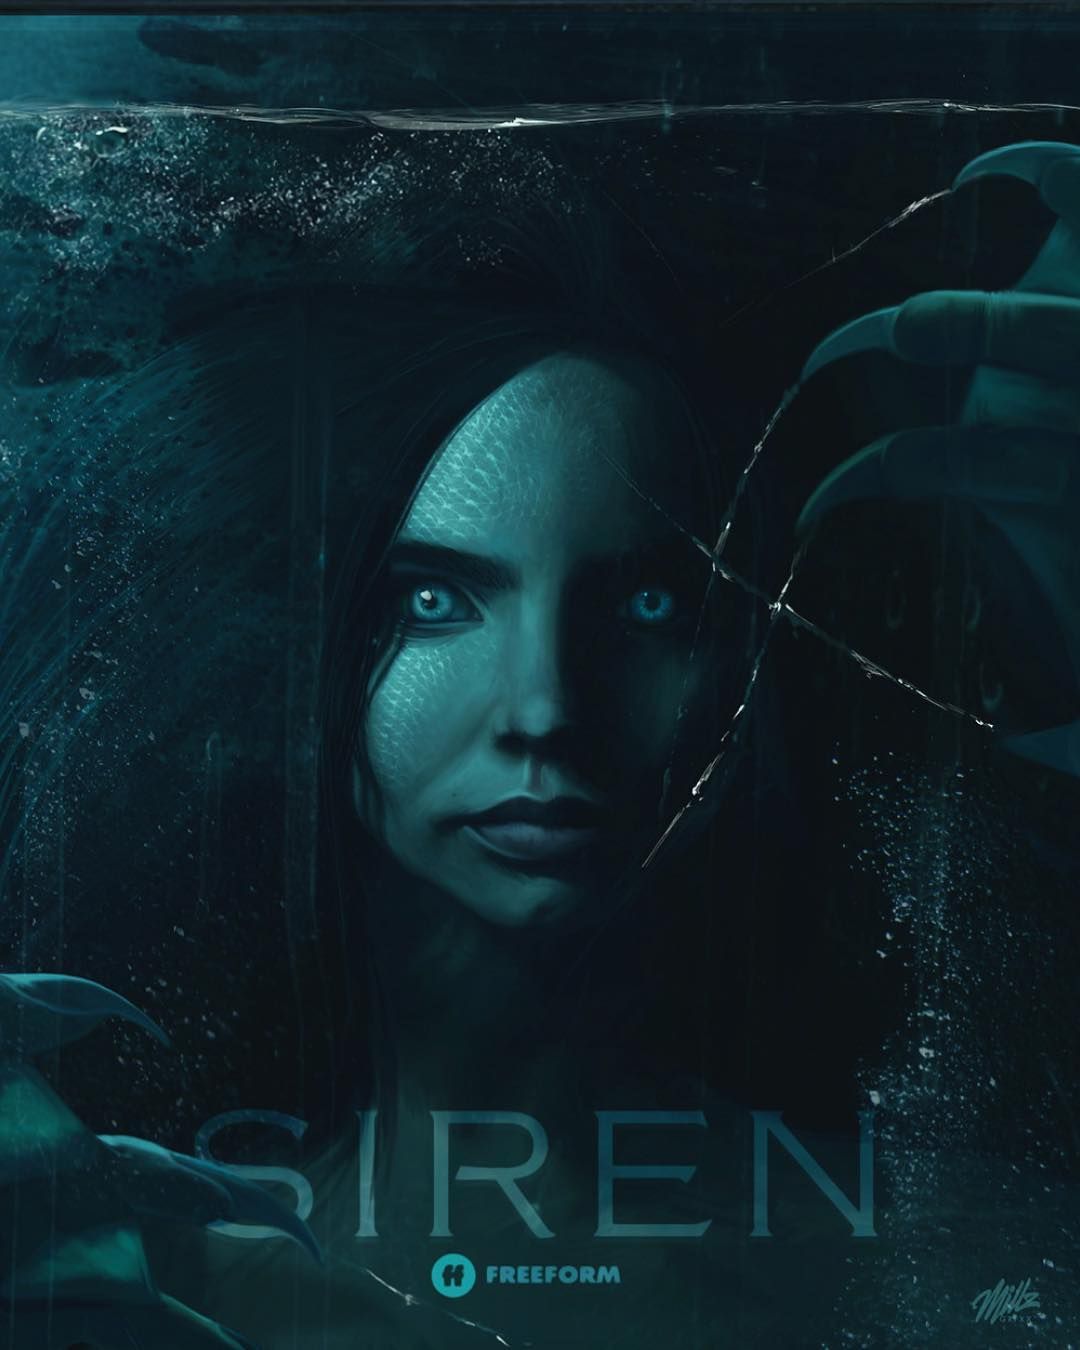 Check out this submission #Siren. Mermaid art, Siren show, Mythical creatures